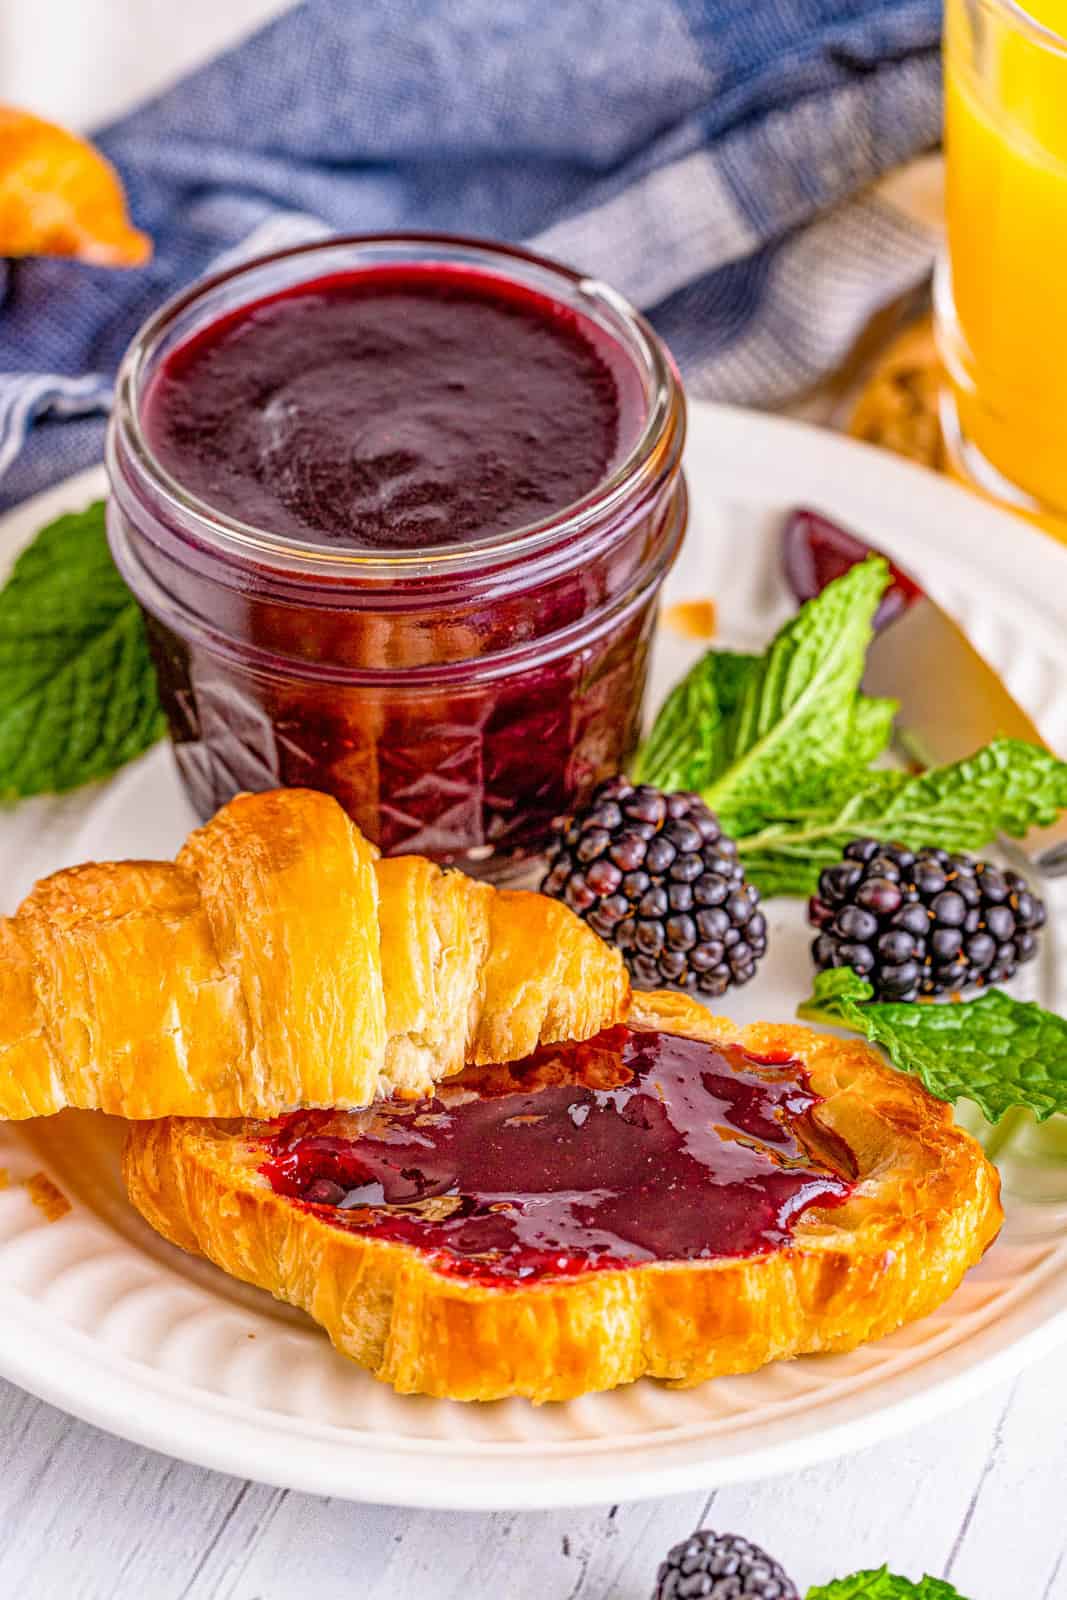 Plate with a croissant spread with Blackberry Jam and jar of jam on plate as well.